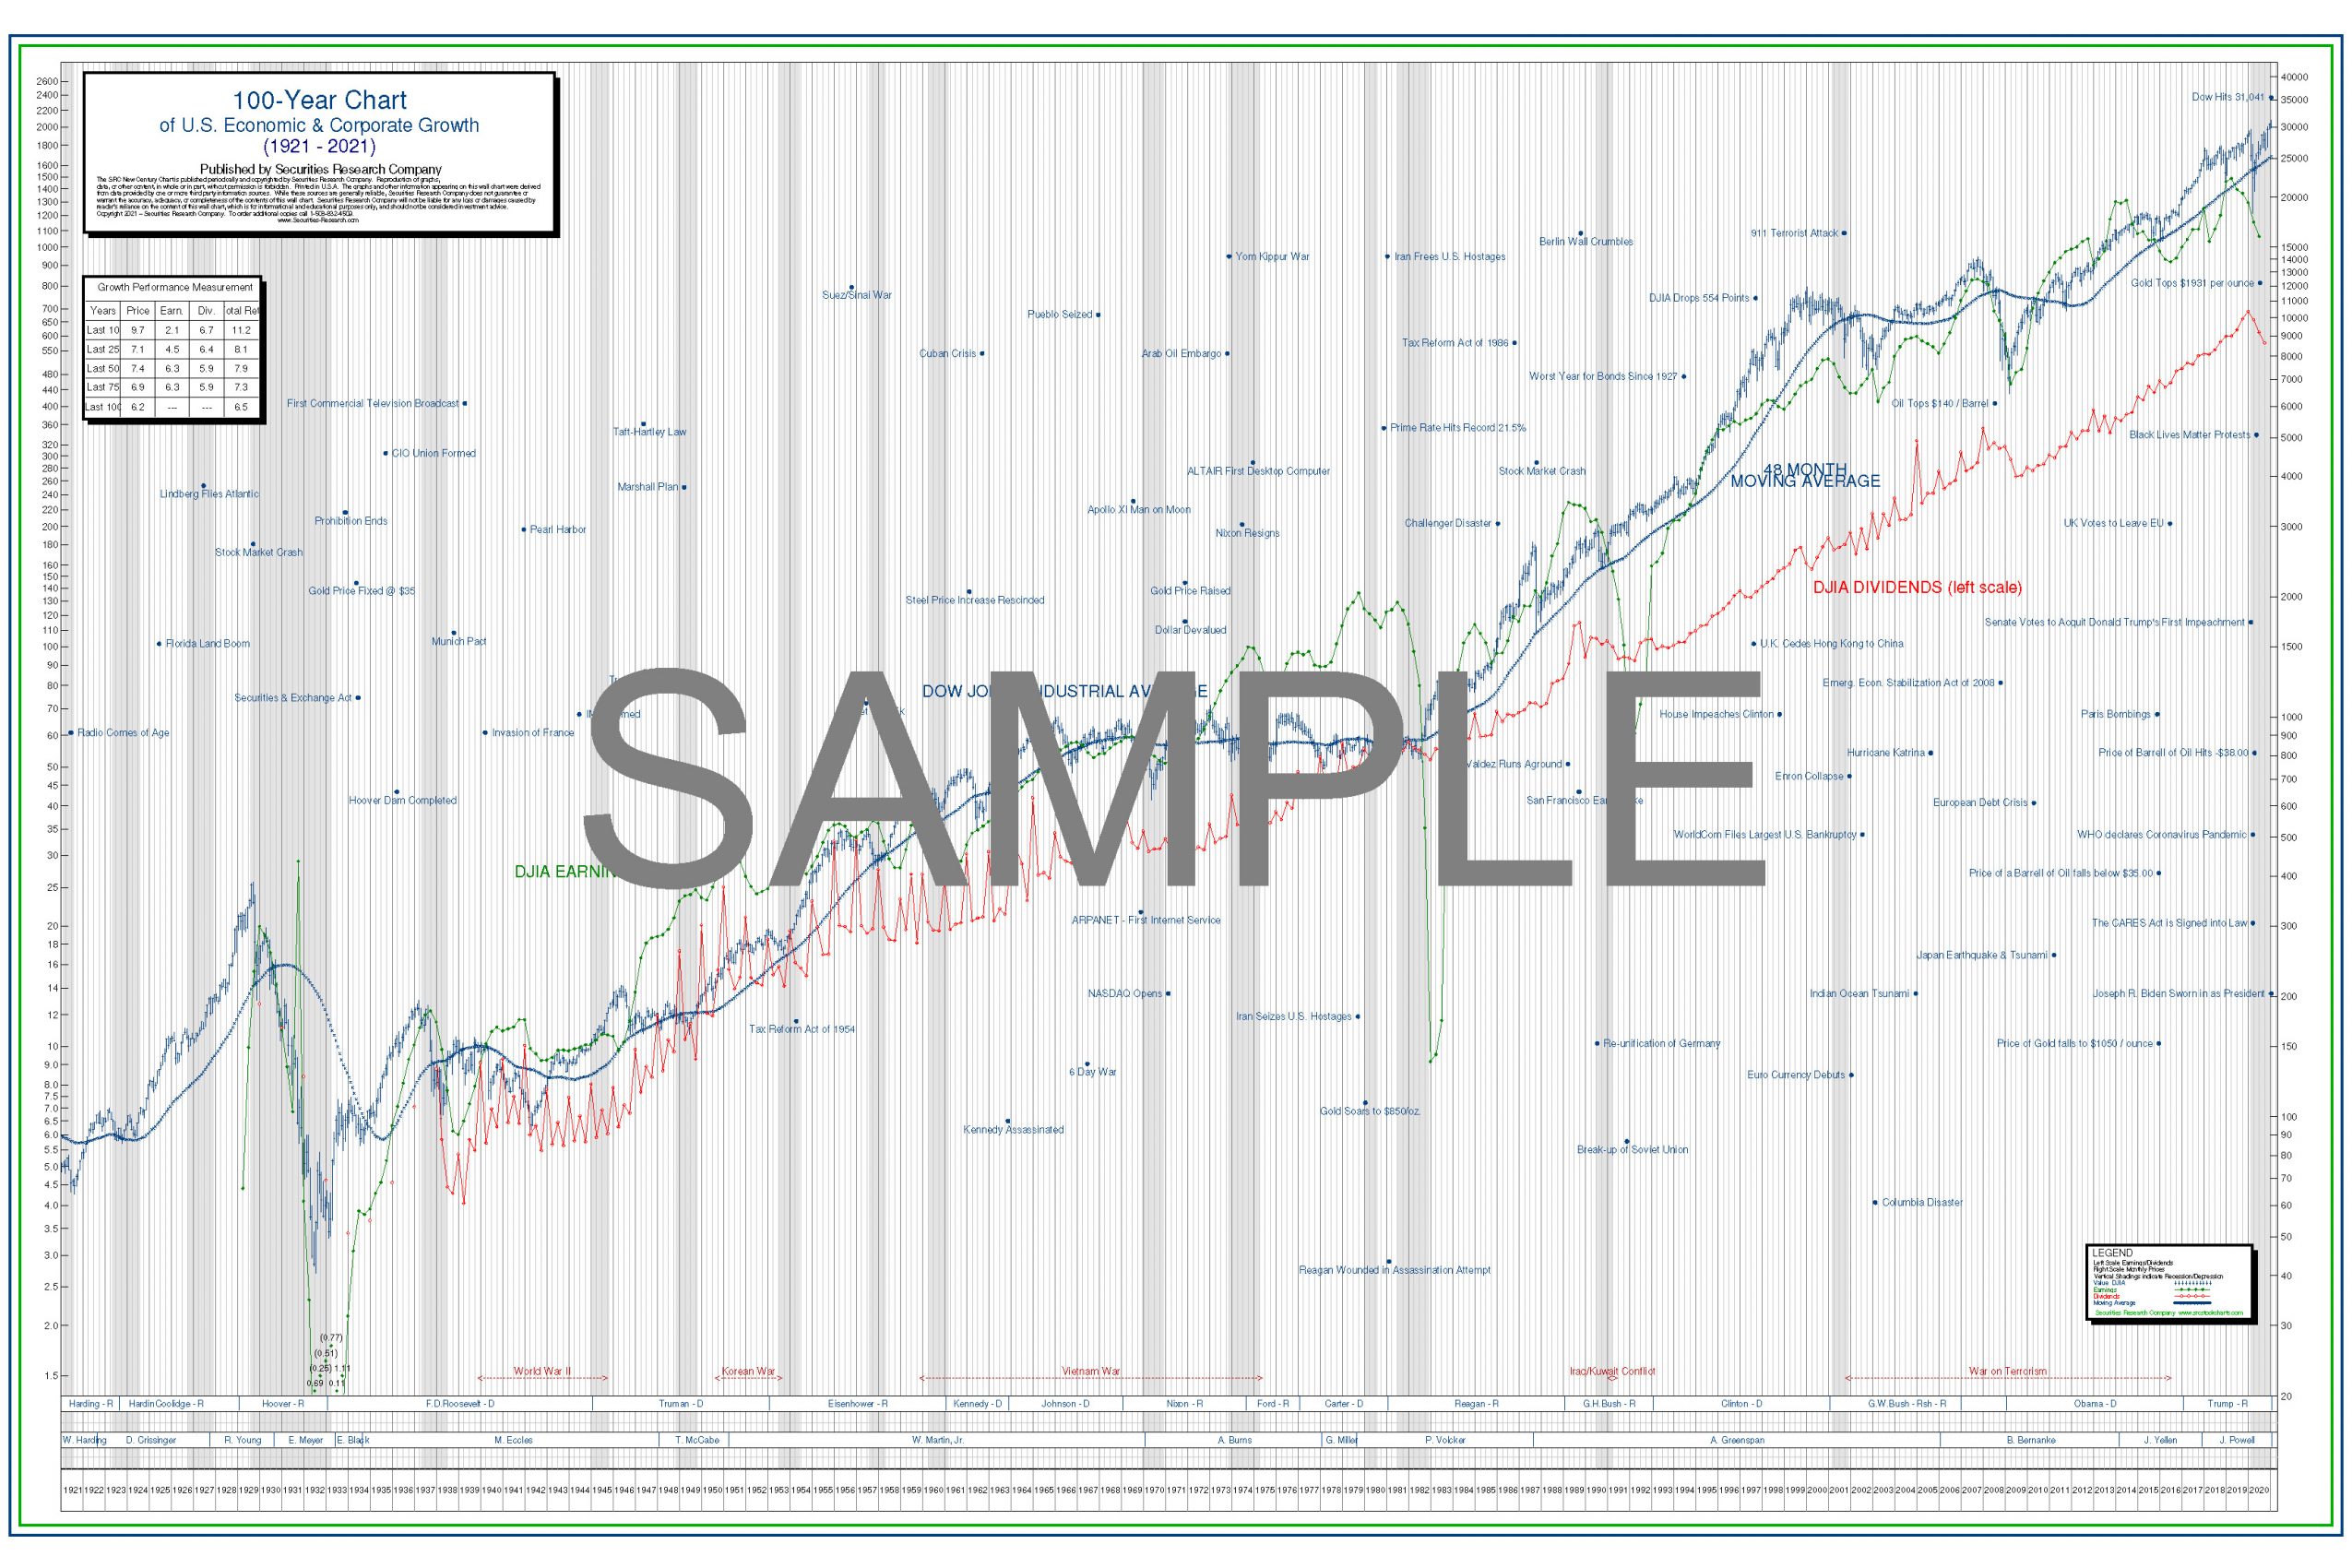 DJIA Stock Chart Poster for the Past 100 Years Securities Research